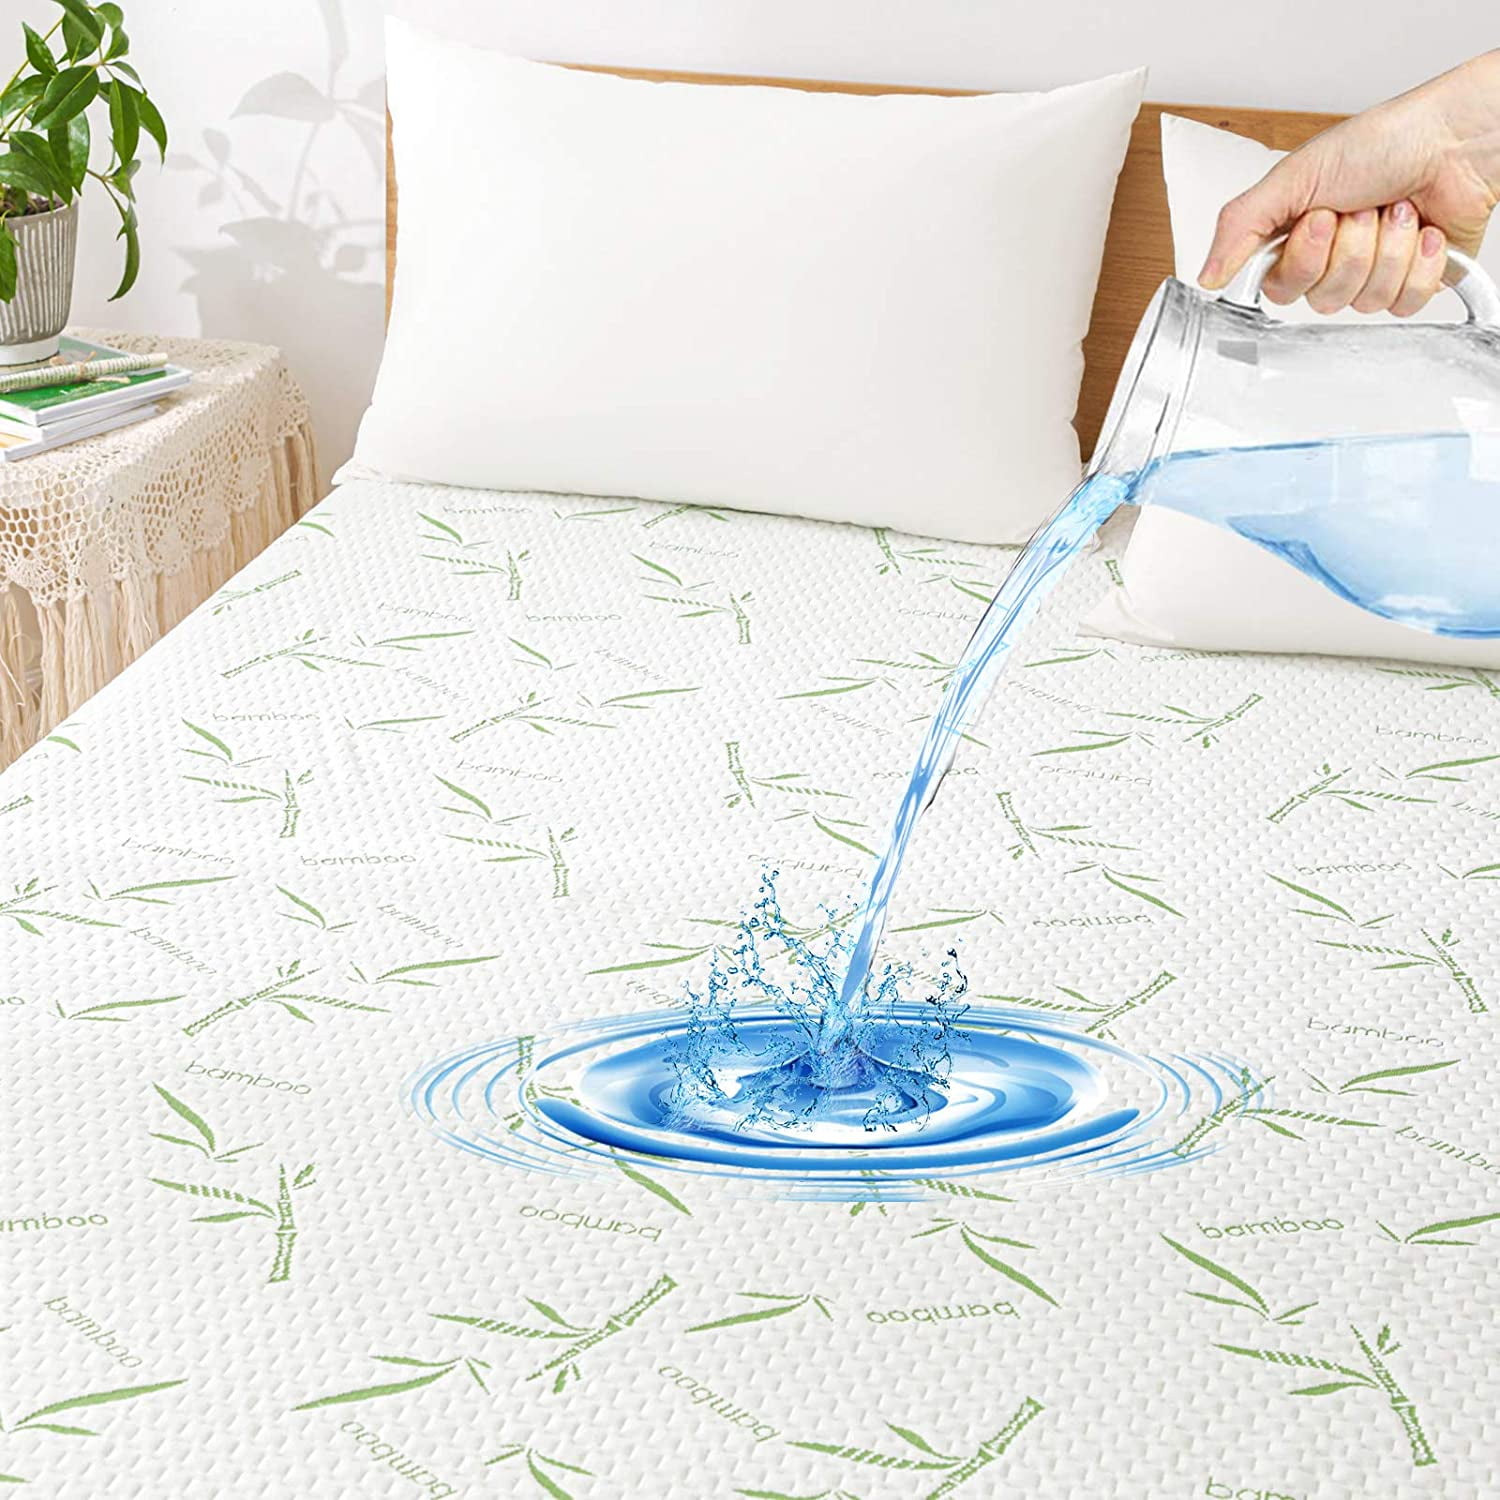 Details about   Waterproof Mattress Protector Bamboo Hypoallergenic Soft Fitted Mattress Cover 